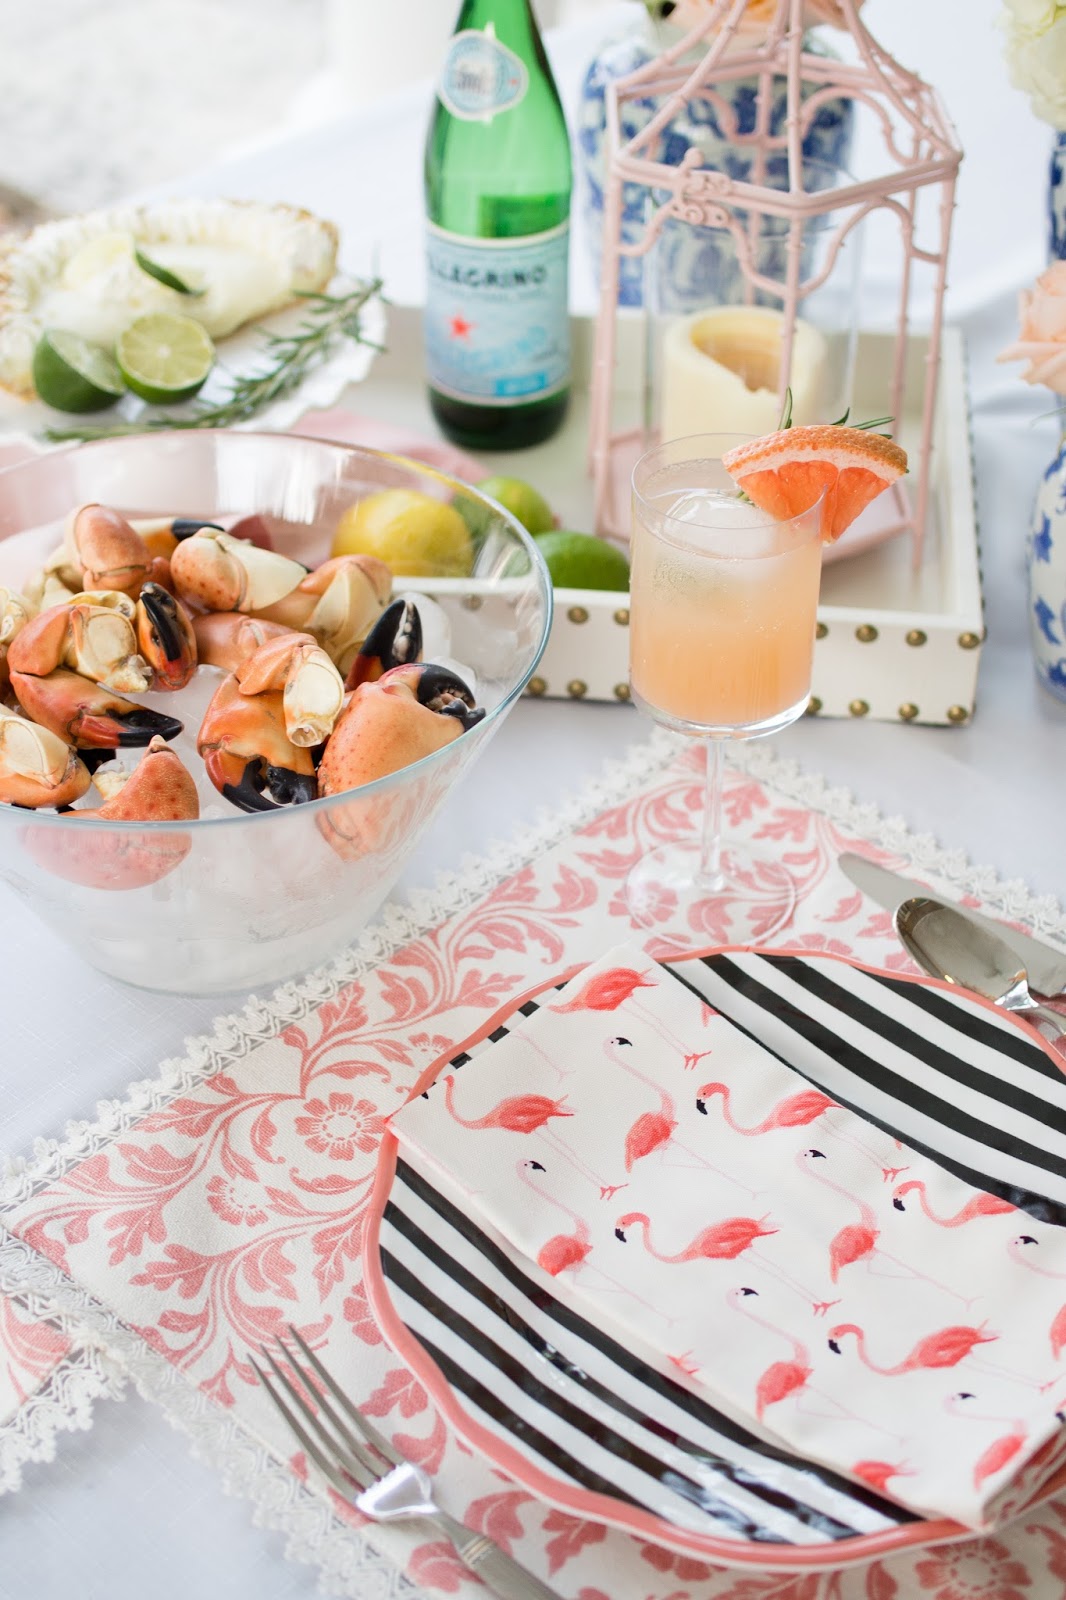 Take outdoor dining to the next level with chic décor and a no-fuss summer meal